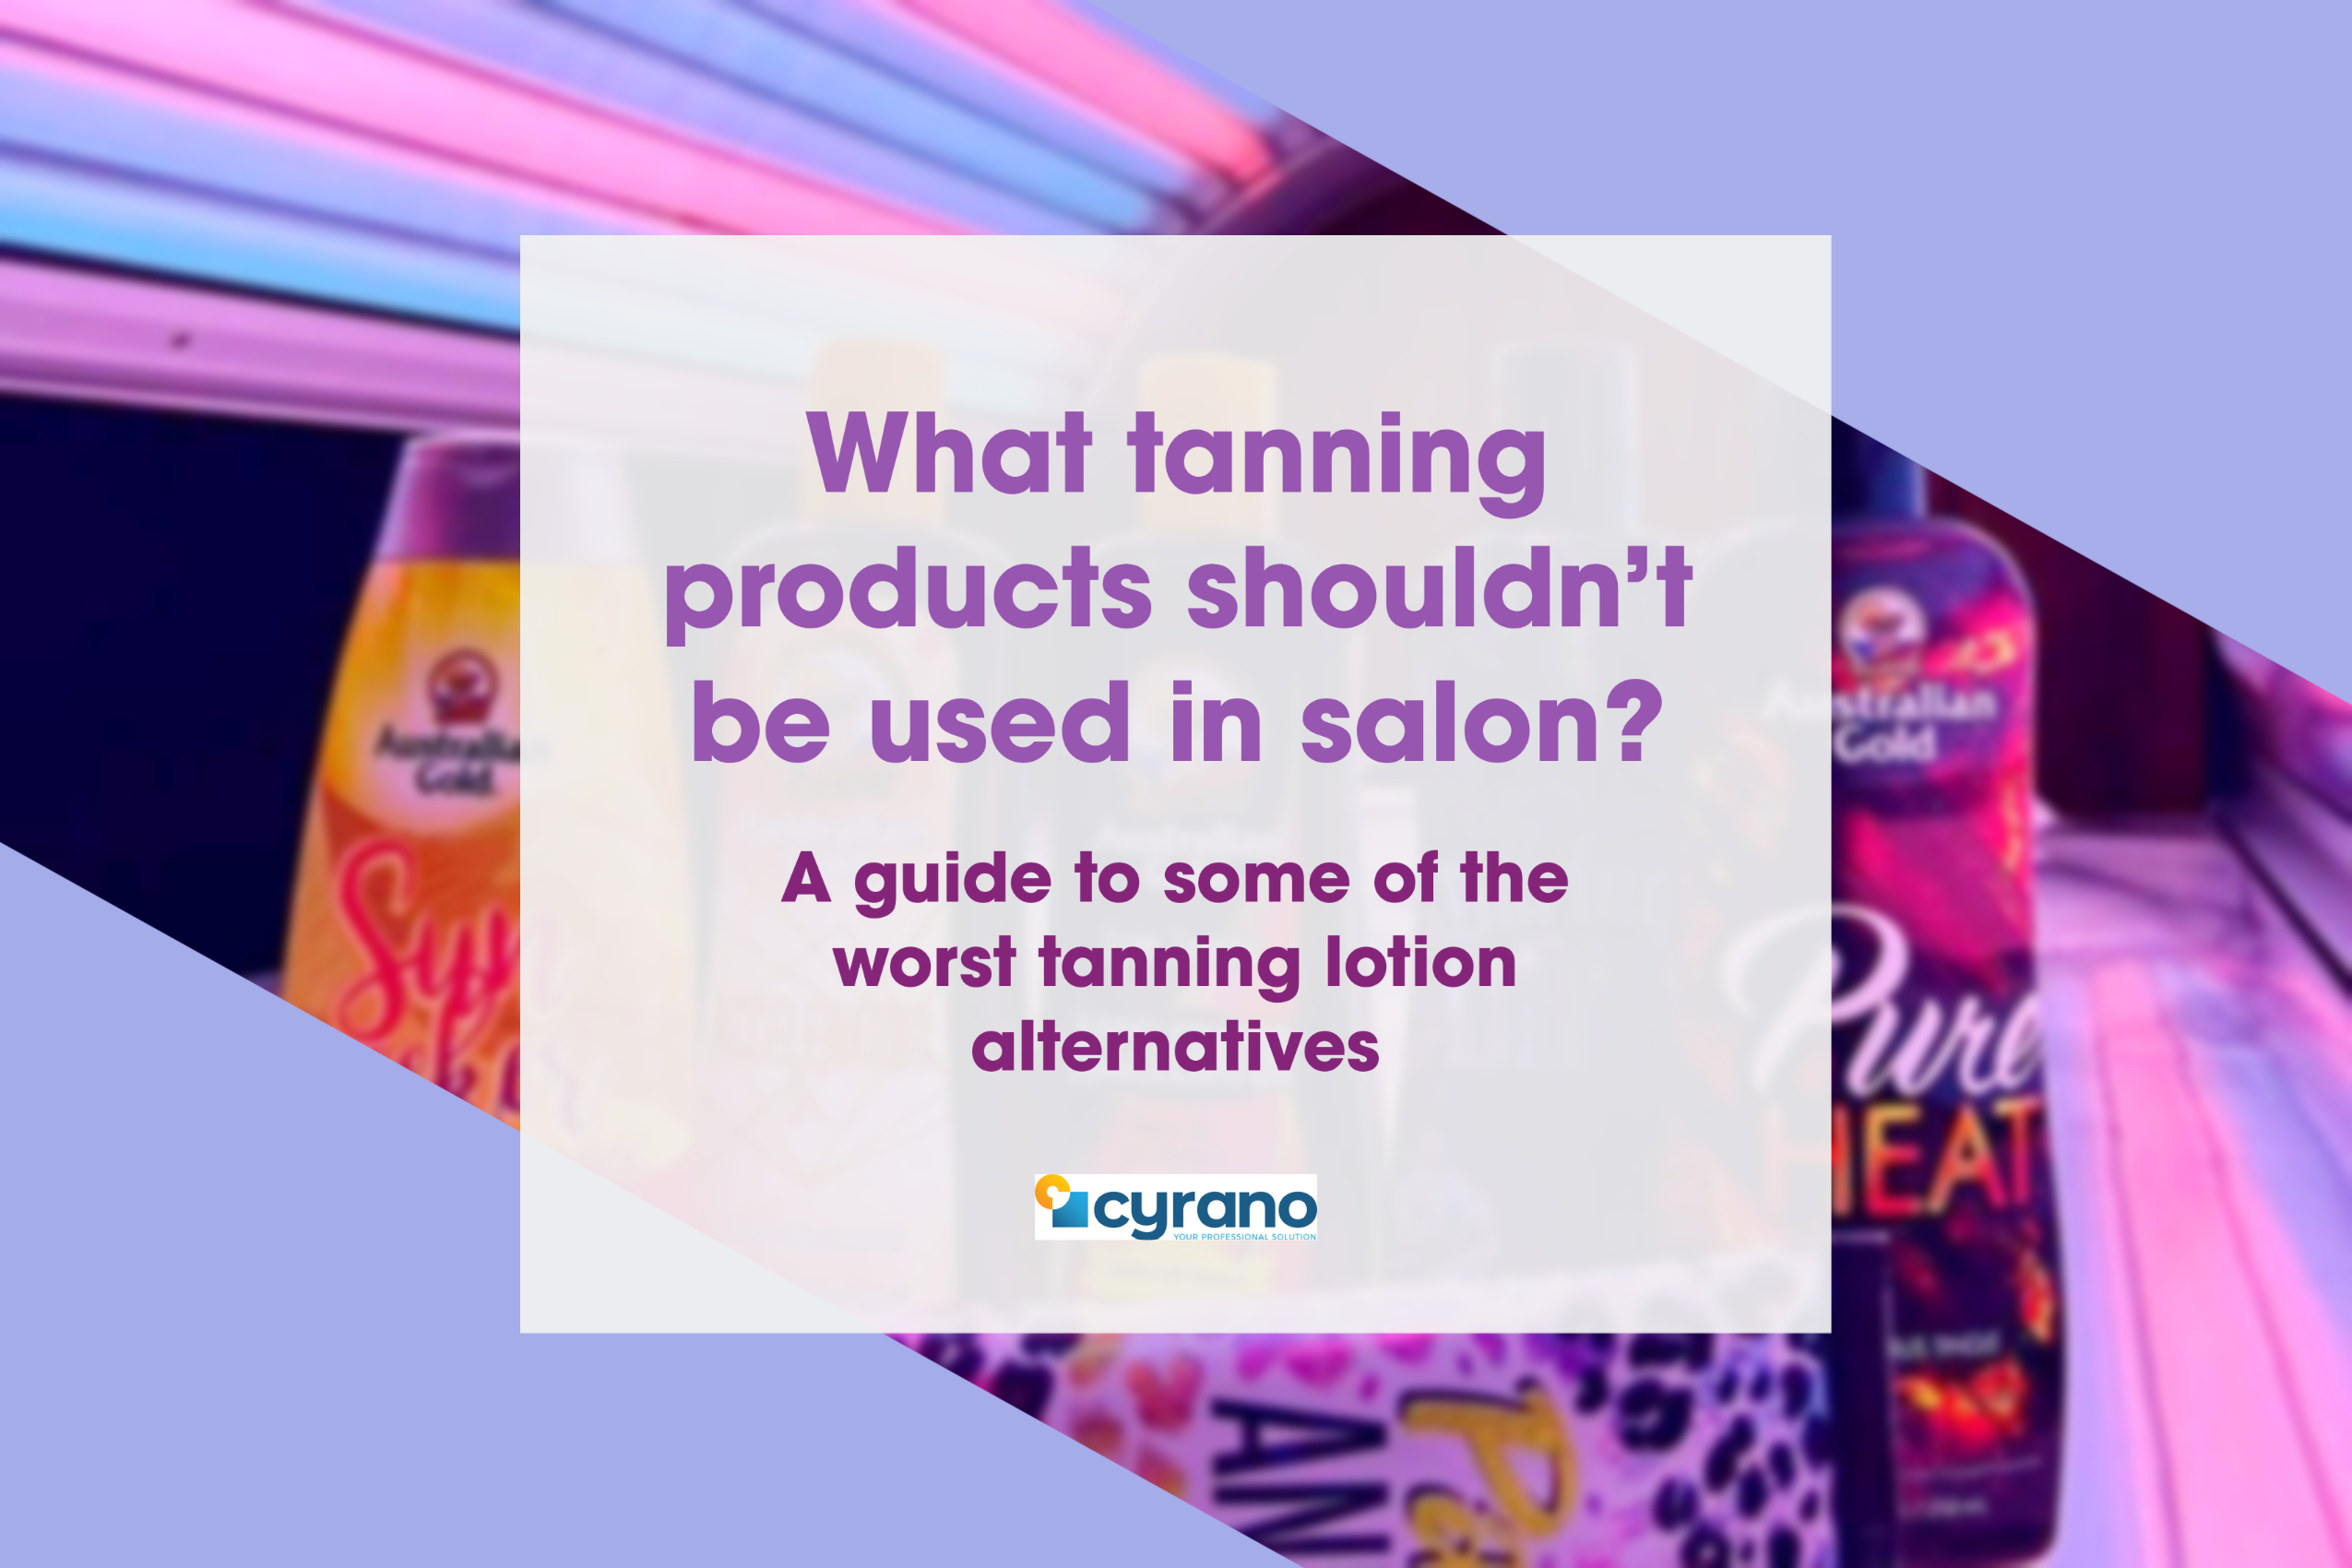 What products shouldn't be used in salon to tan? - Cyrano Ltd